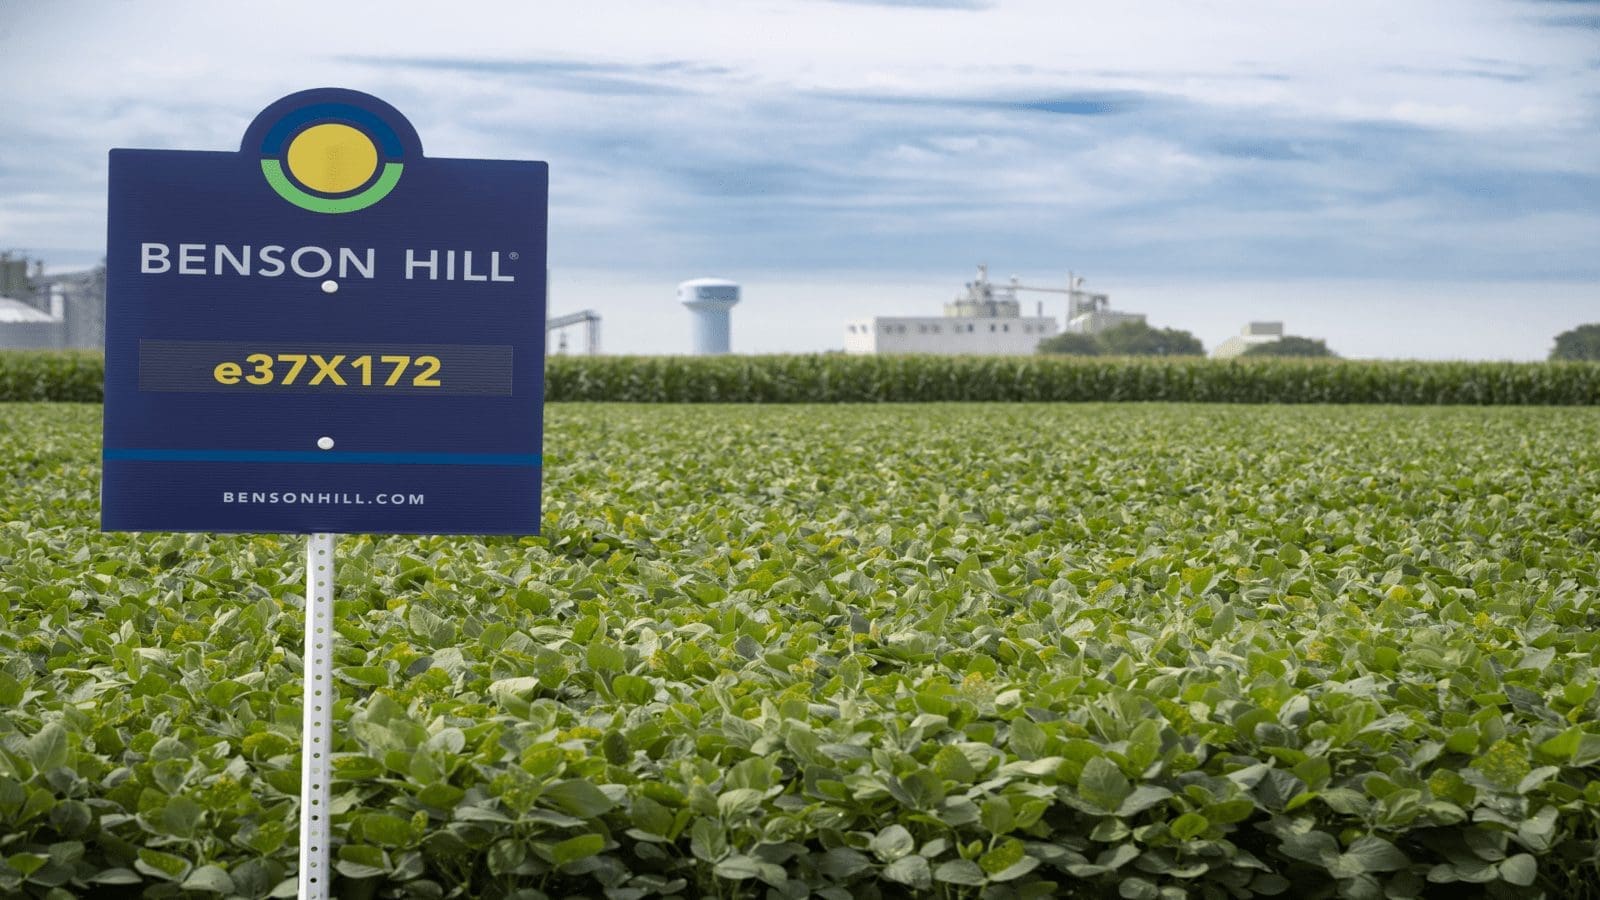 Benson Hill becomes first US company to receive ProTerra certification for non-GMO soy